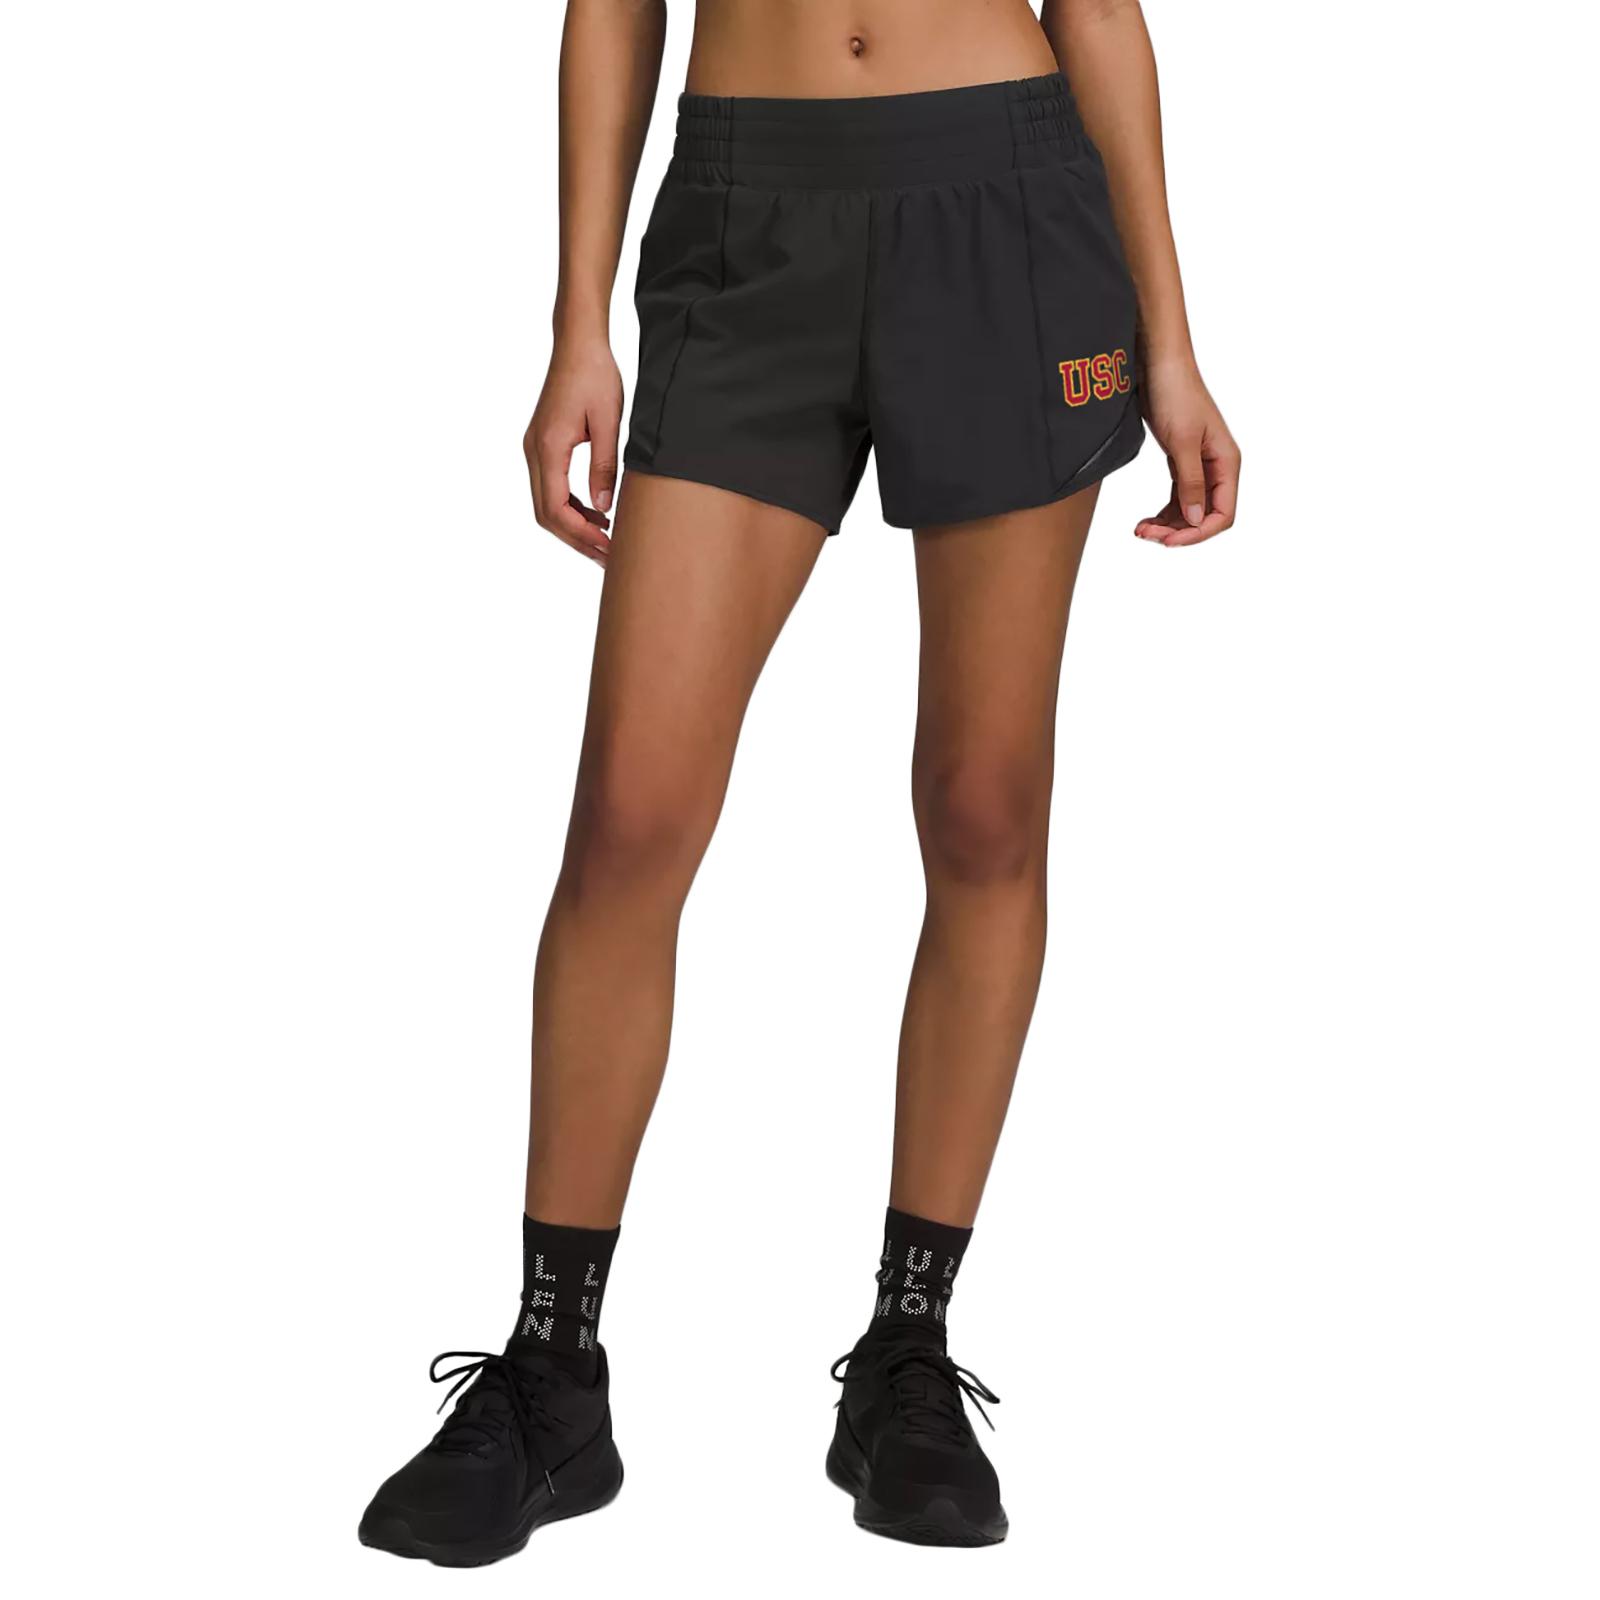 USC Womens Hotty Hot Low-Rise 4" Short image01